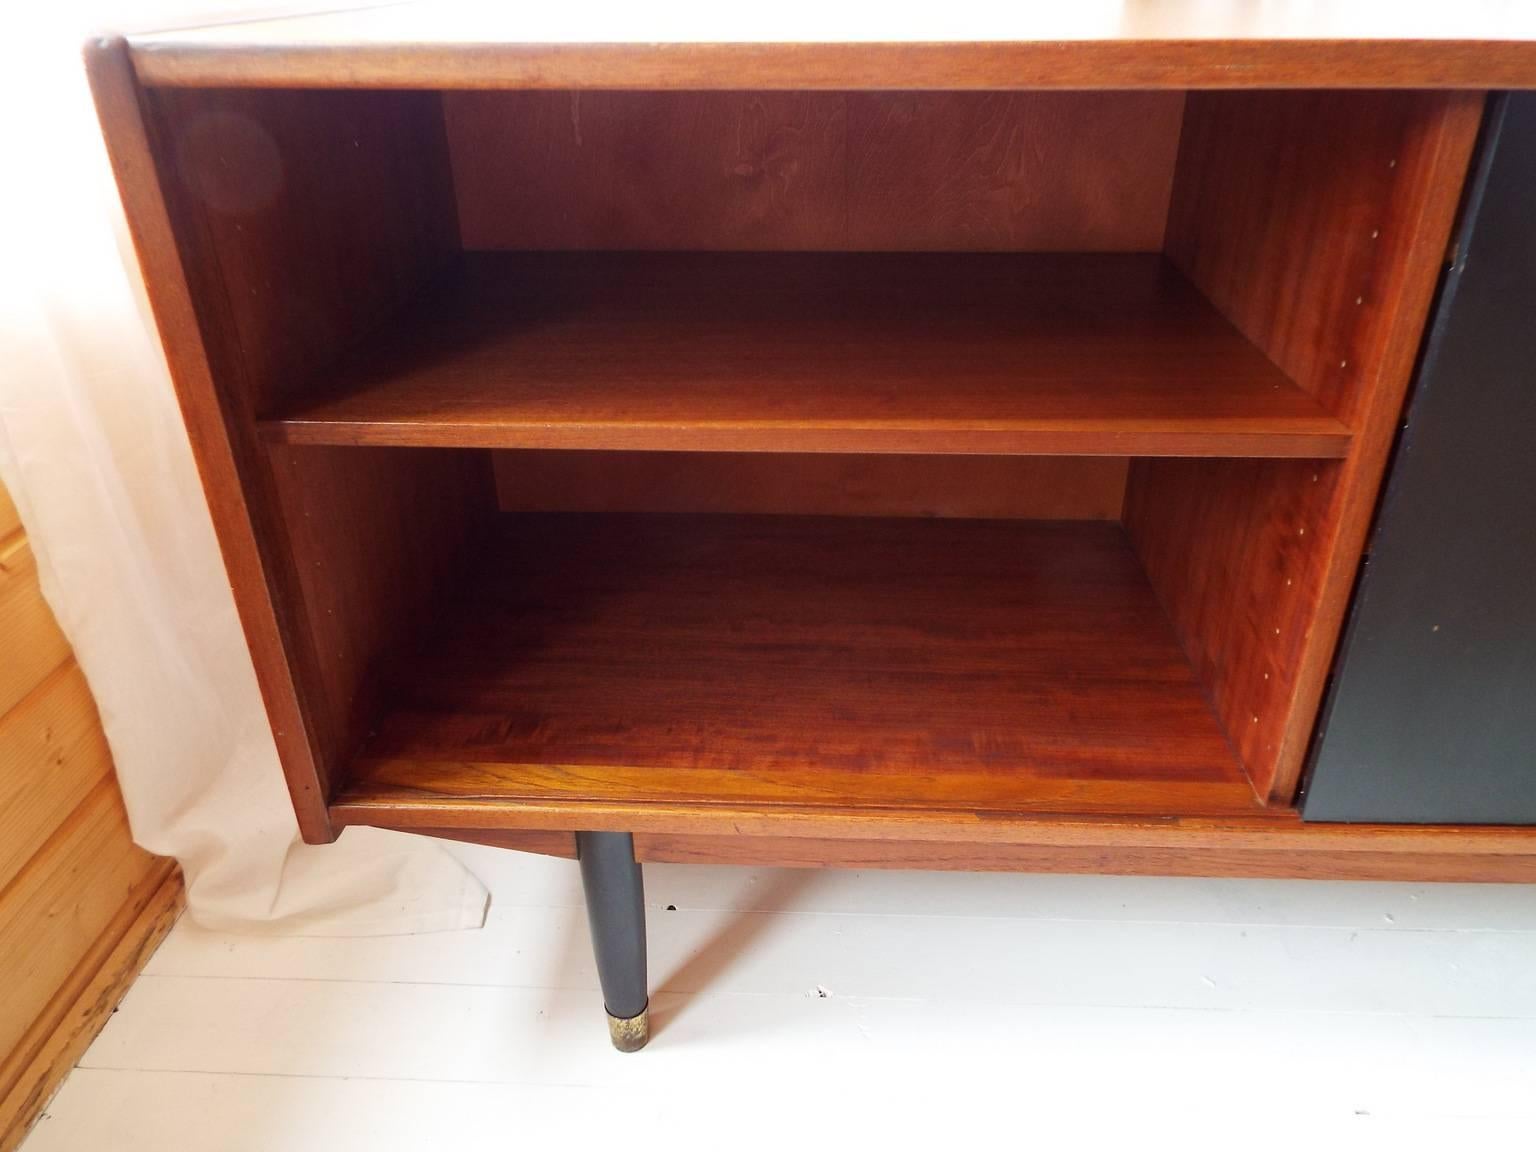 Midcentury Teak Sideboard/ Credenza by Nils Jonsson for Troeds Bjarnum In Good Condition For Sale In Warwickshire, GB